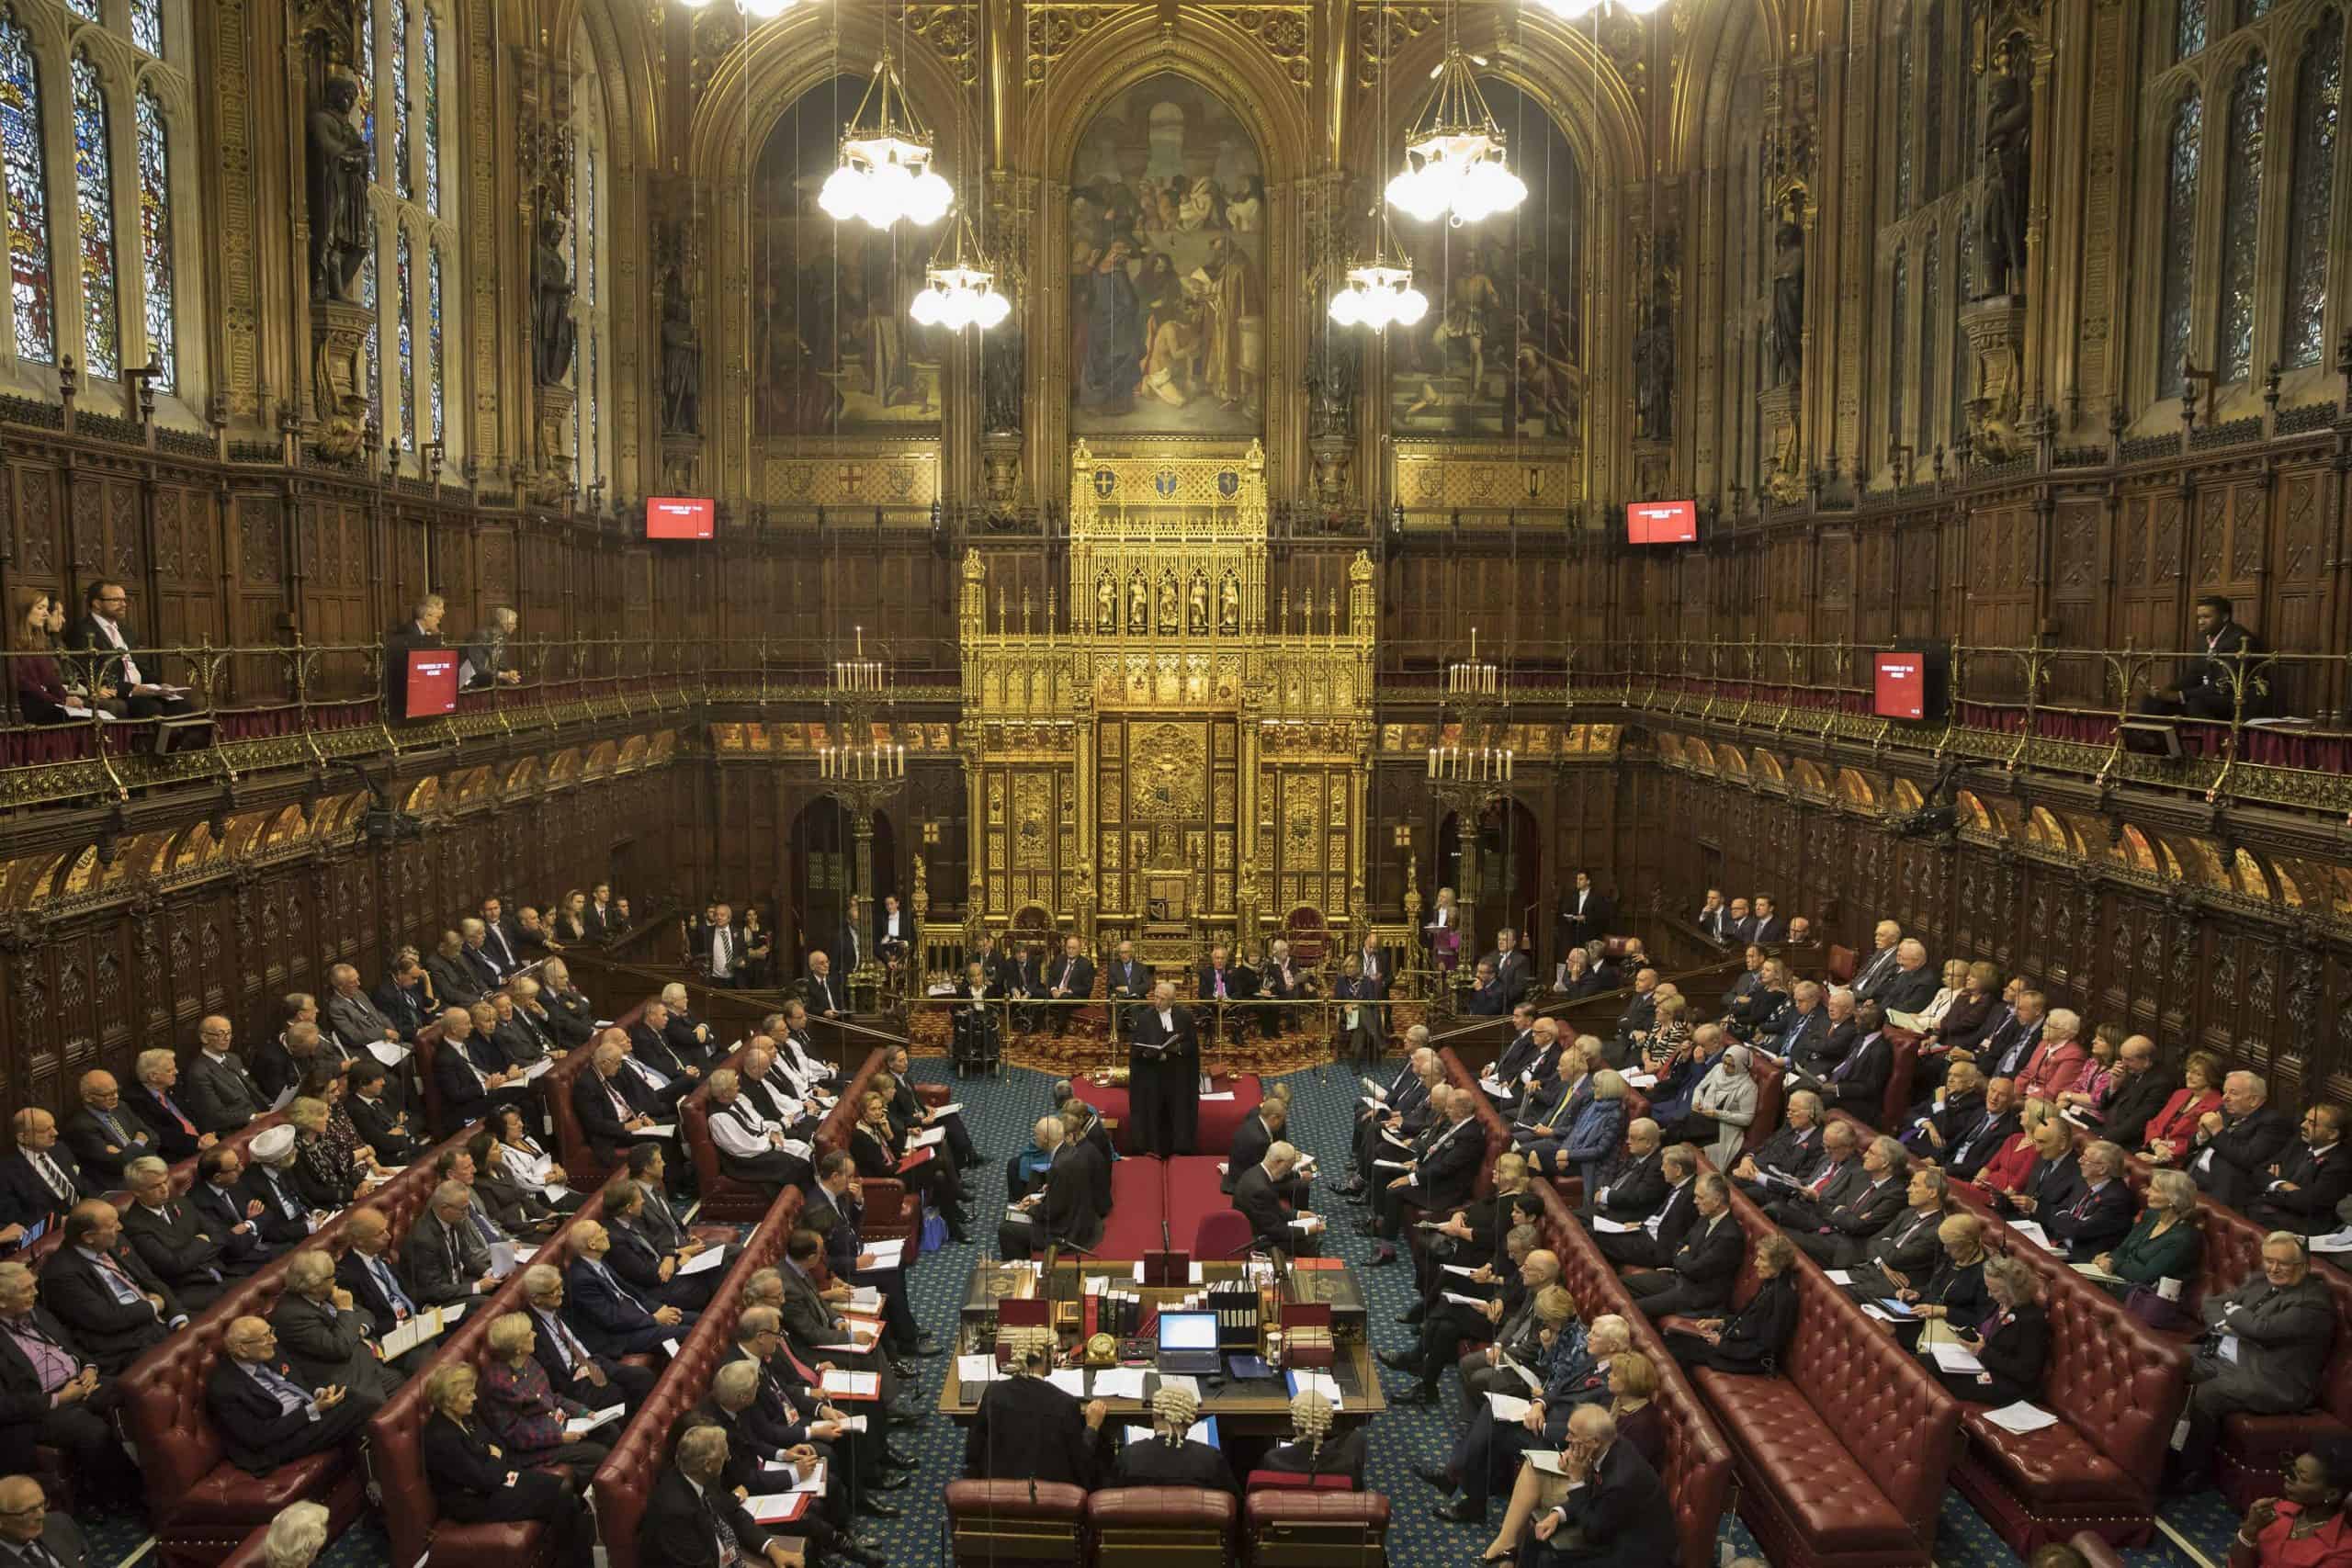 ‘Club for an elite few’: Calls to abolish ‘absurd practice’ of aristocrat elections in House of Lords